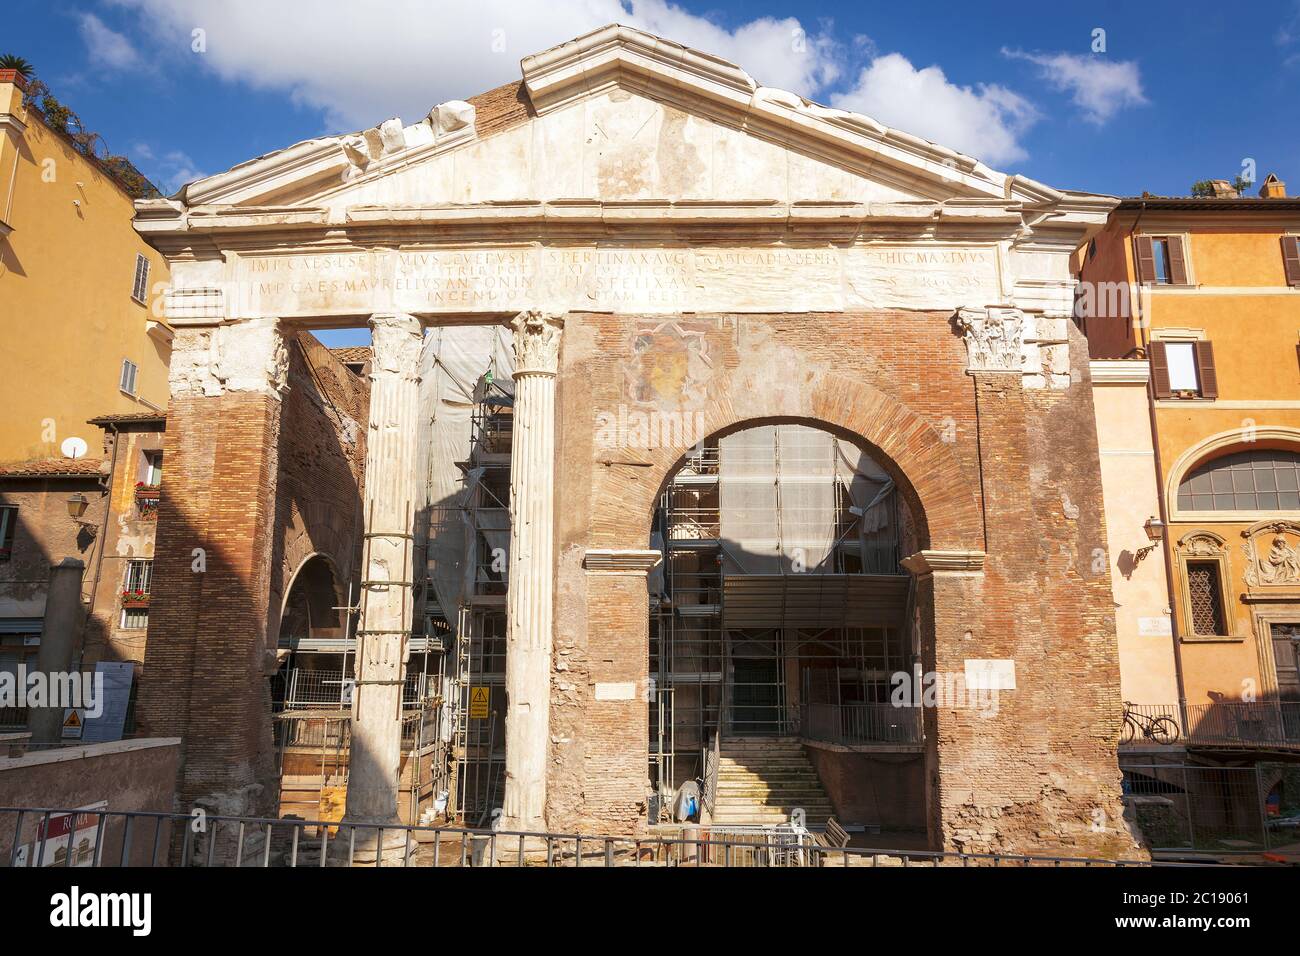 Frontal view of the ancient Porticus of Octavia (Portico di Ottavia) in Rome, Italy Stock Photo